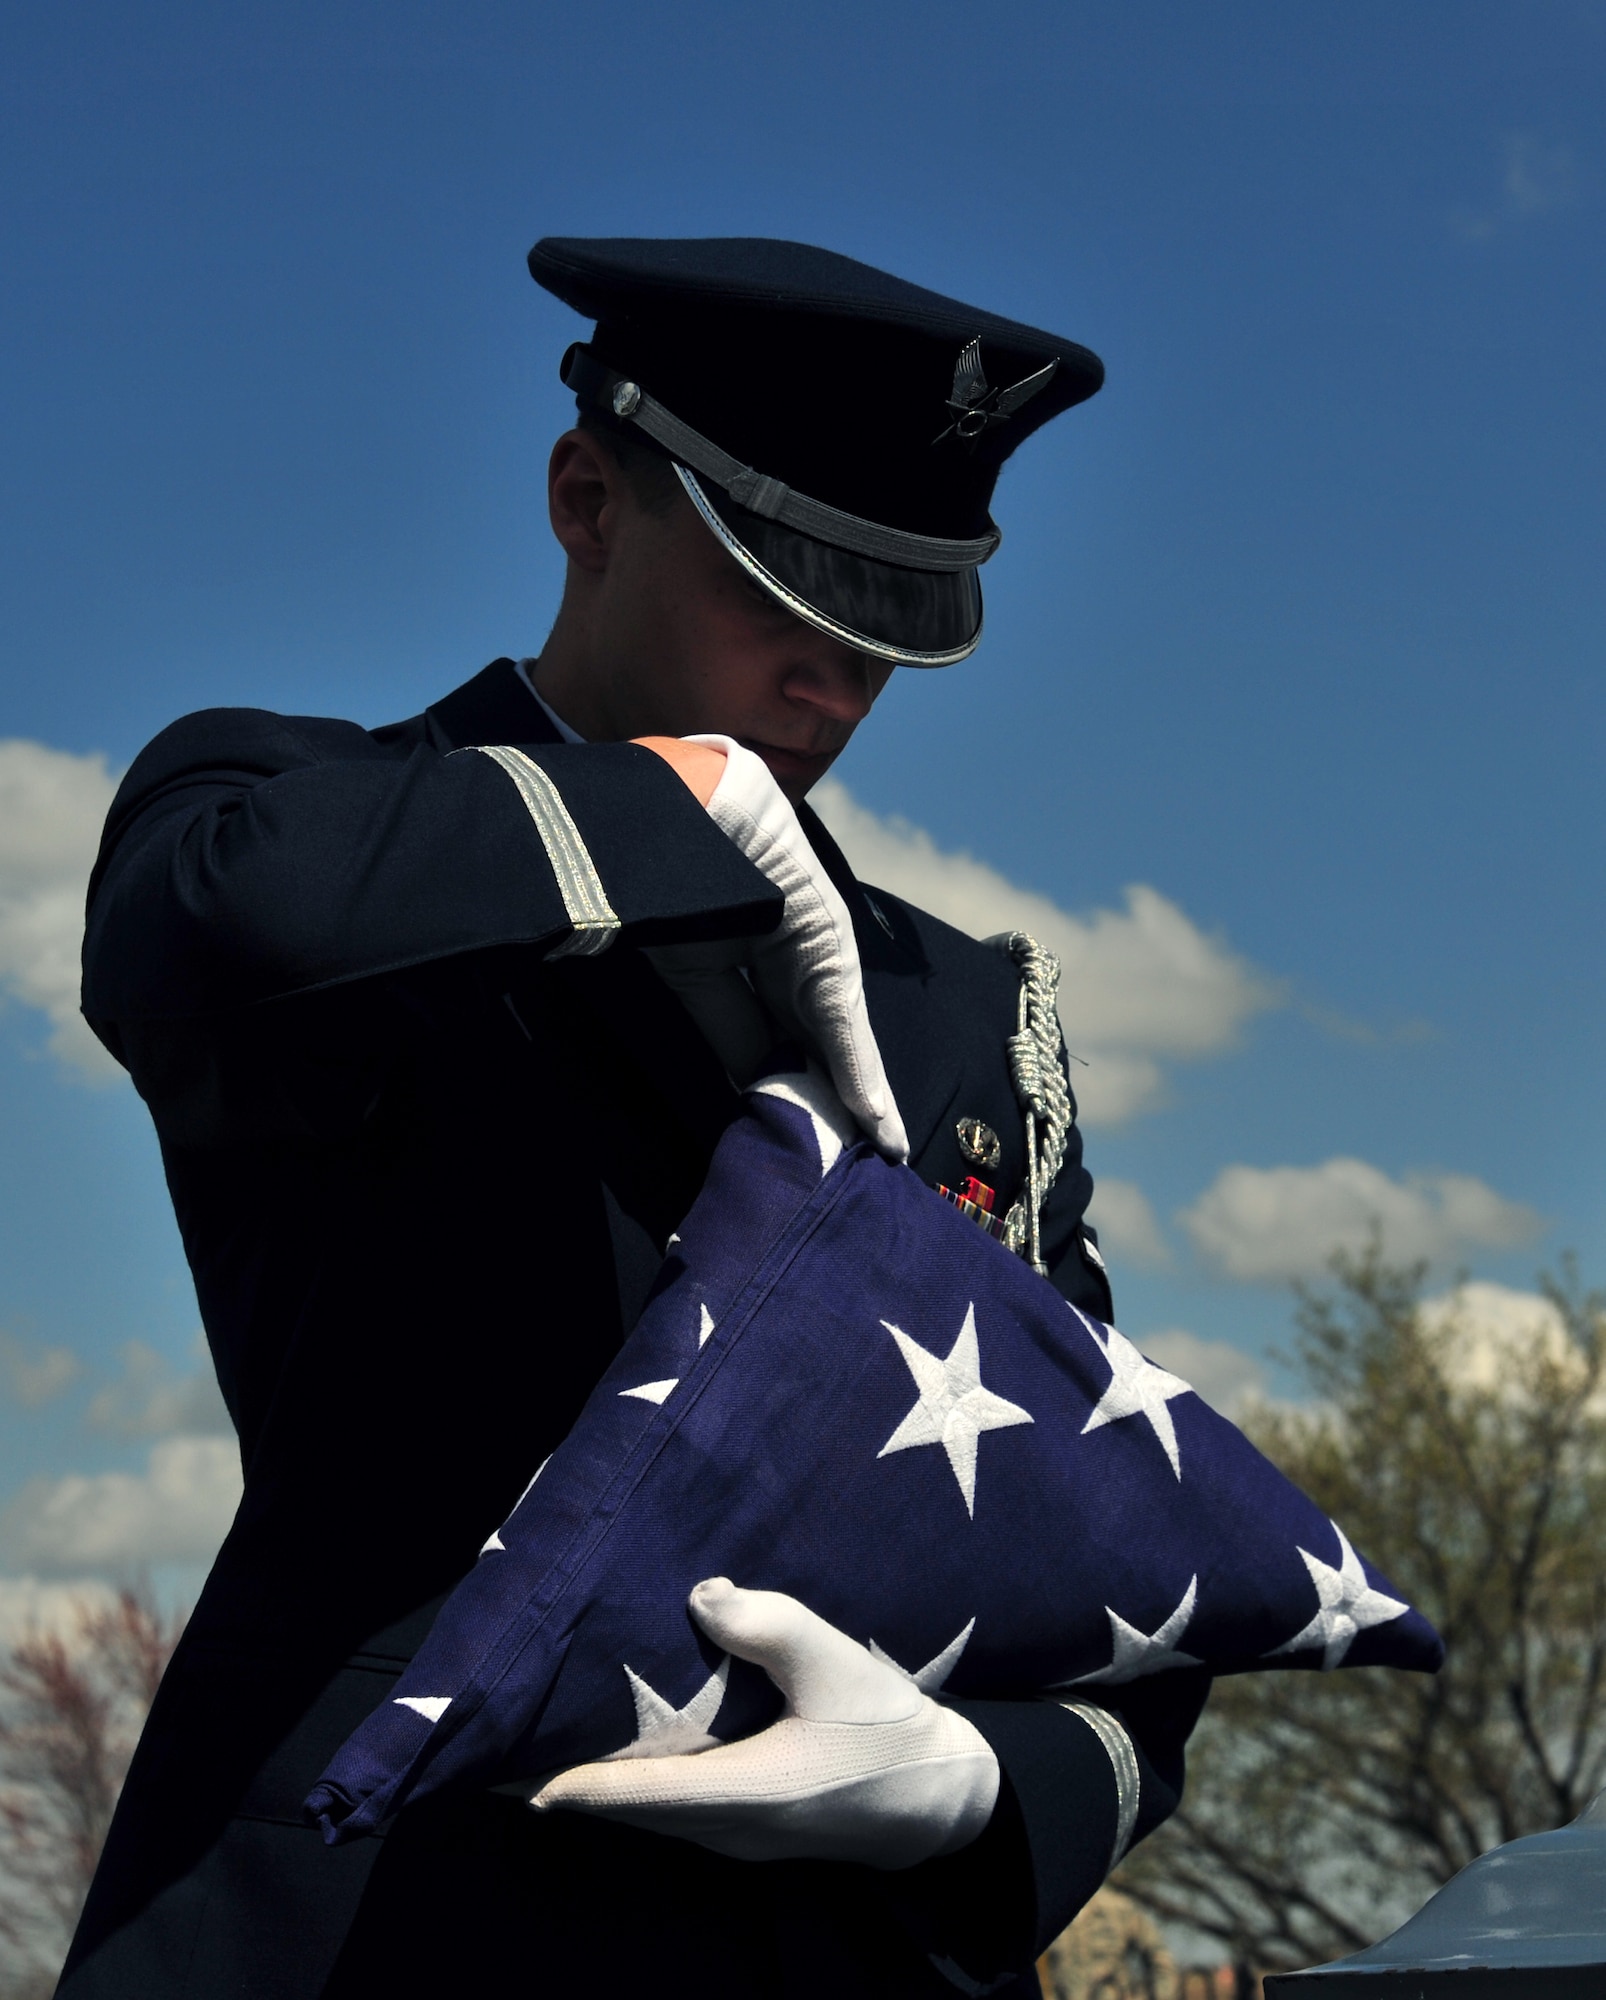 Members of Whiteman Honor Guard practice the procedures of a military funeral at Knob Noster cemetery in Knob Noster, Mo., March 15, 2016. Whiteman Honor Guard serves more than 100 counties spanning Missouri to Kansas covering more than 70,000 square miles across both states. Whiteman Honor Guard represents the respect each fallen service member deserves, and upholds traditions held dear to the armed forces. (U.S. Air Force photos by Airman 1st Class Jovan Banks)